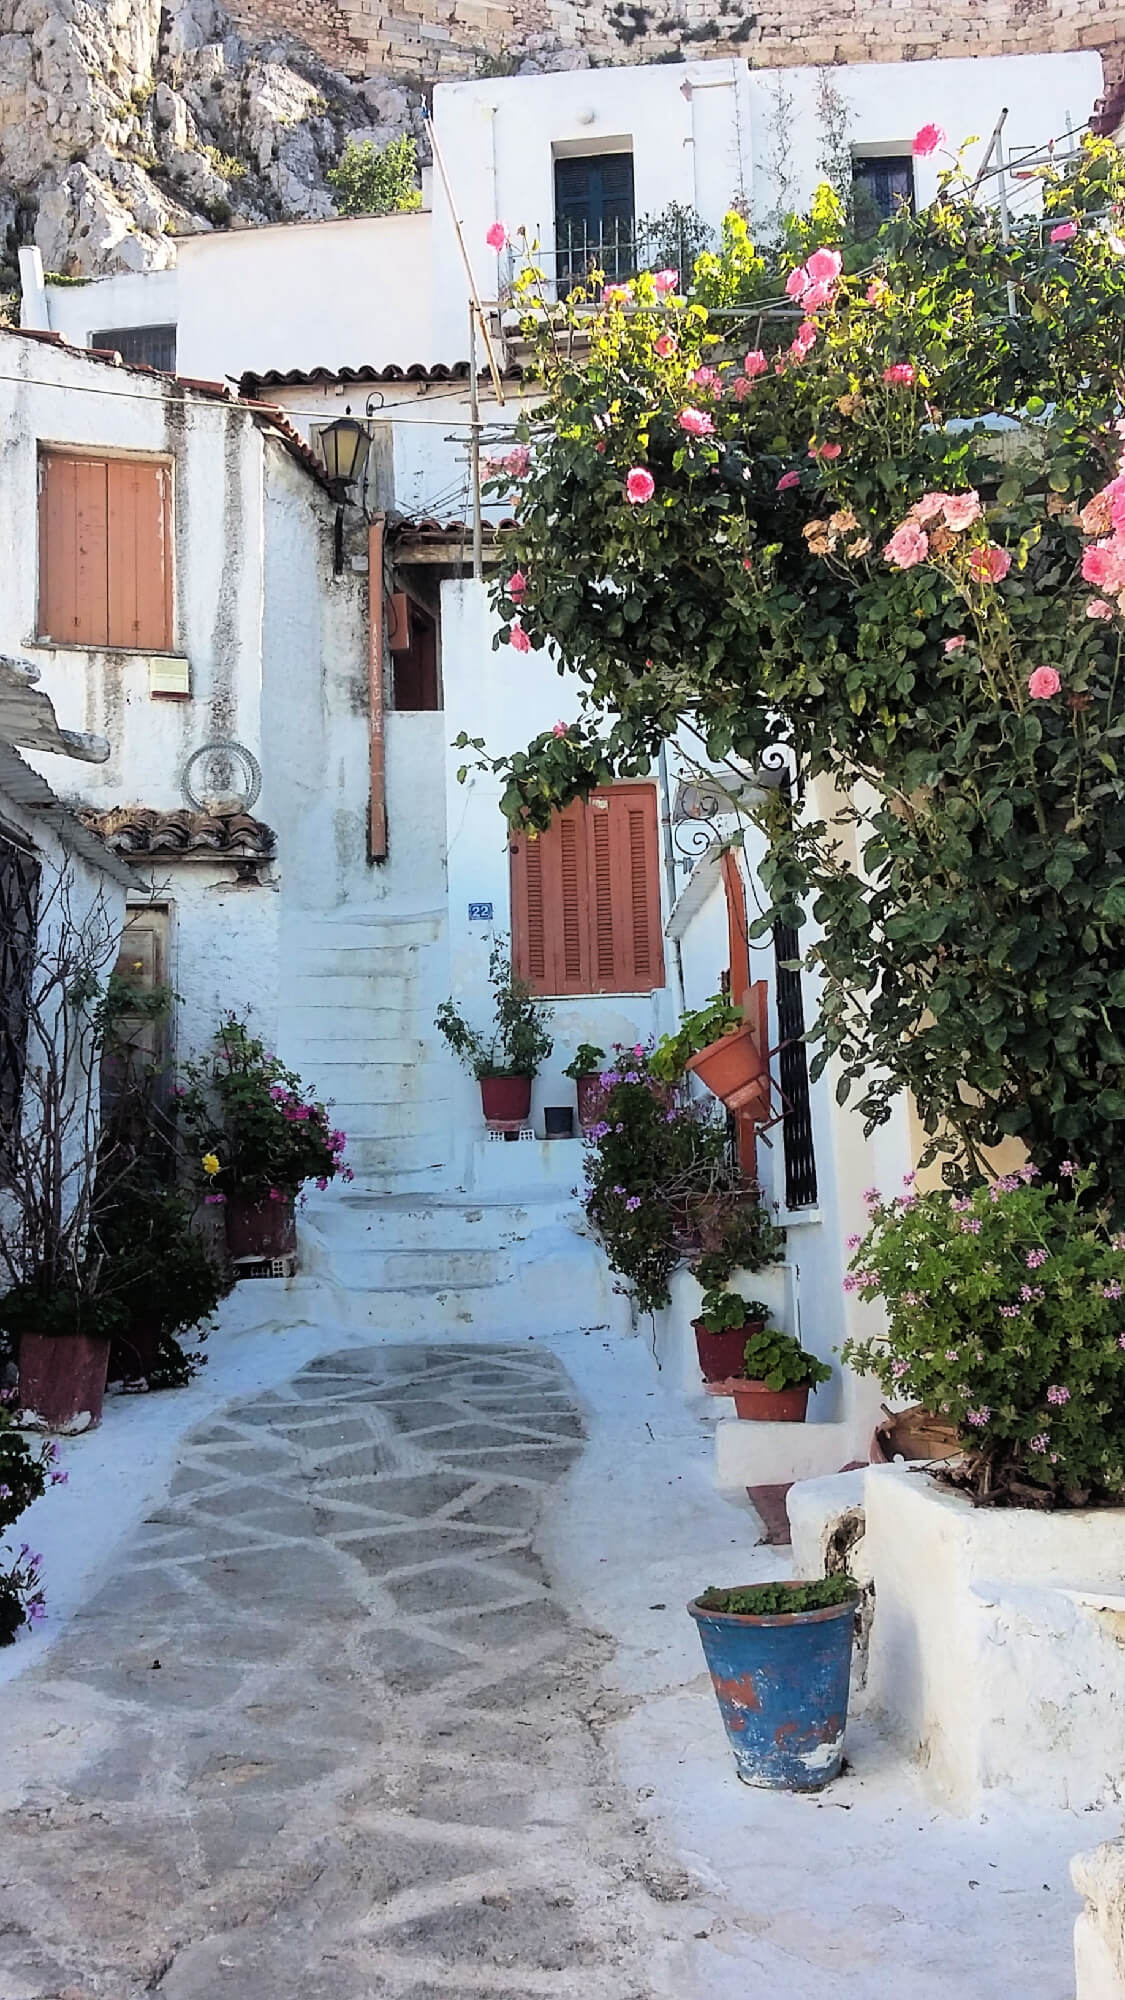 Be sure to check out Plaka district during your 3 days in Athens.